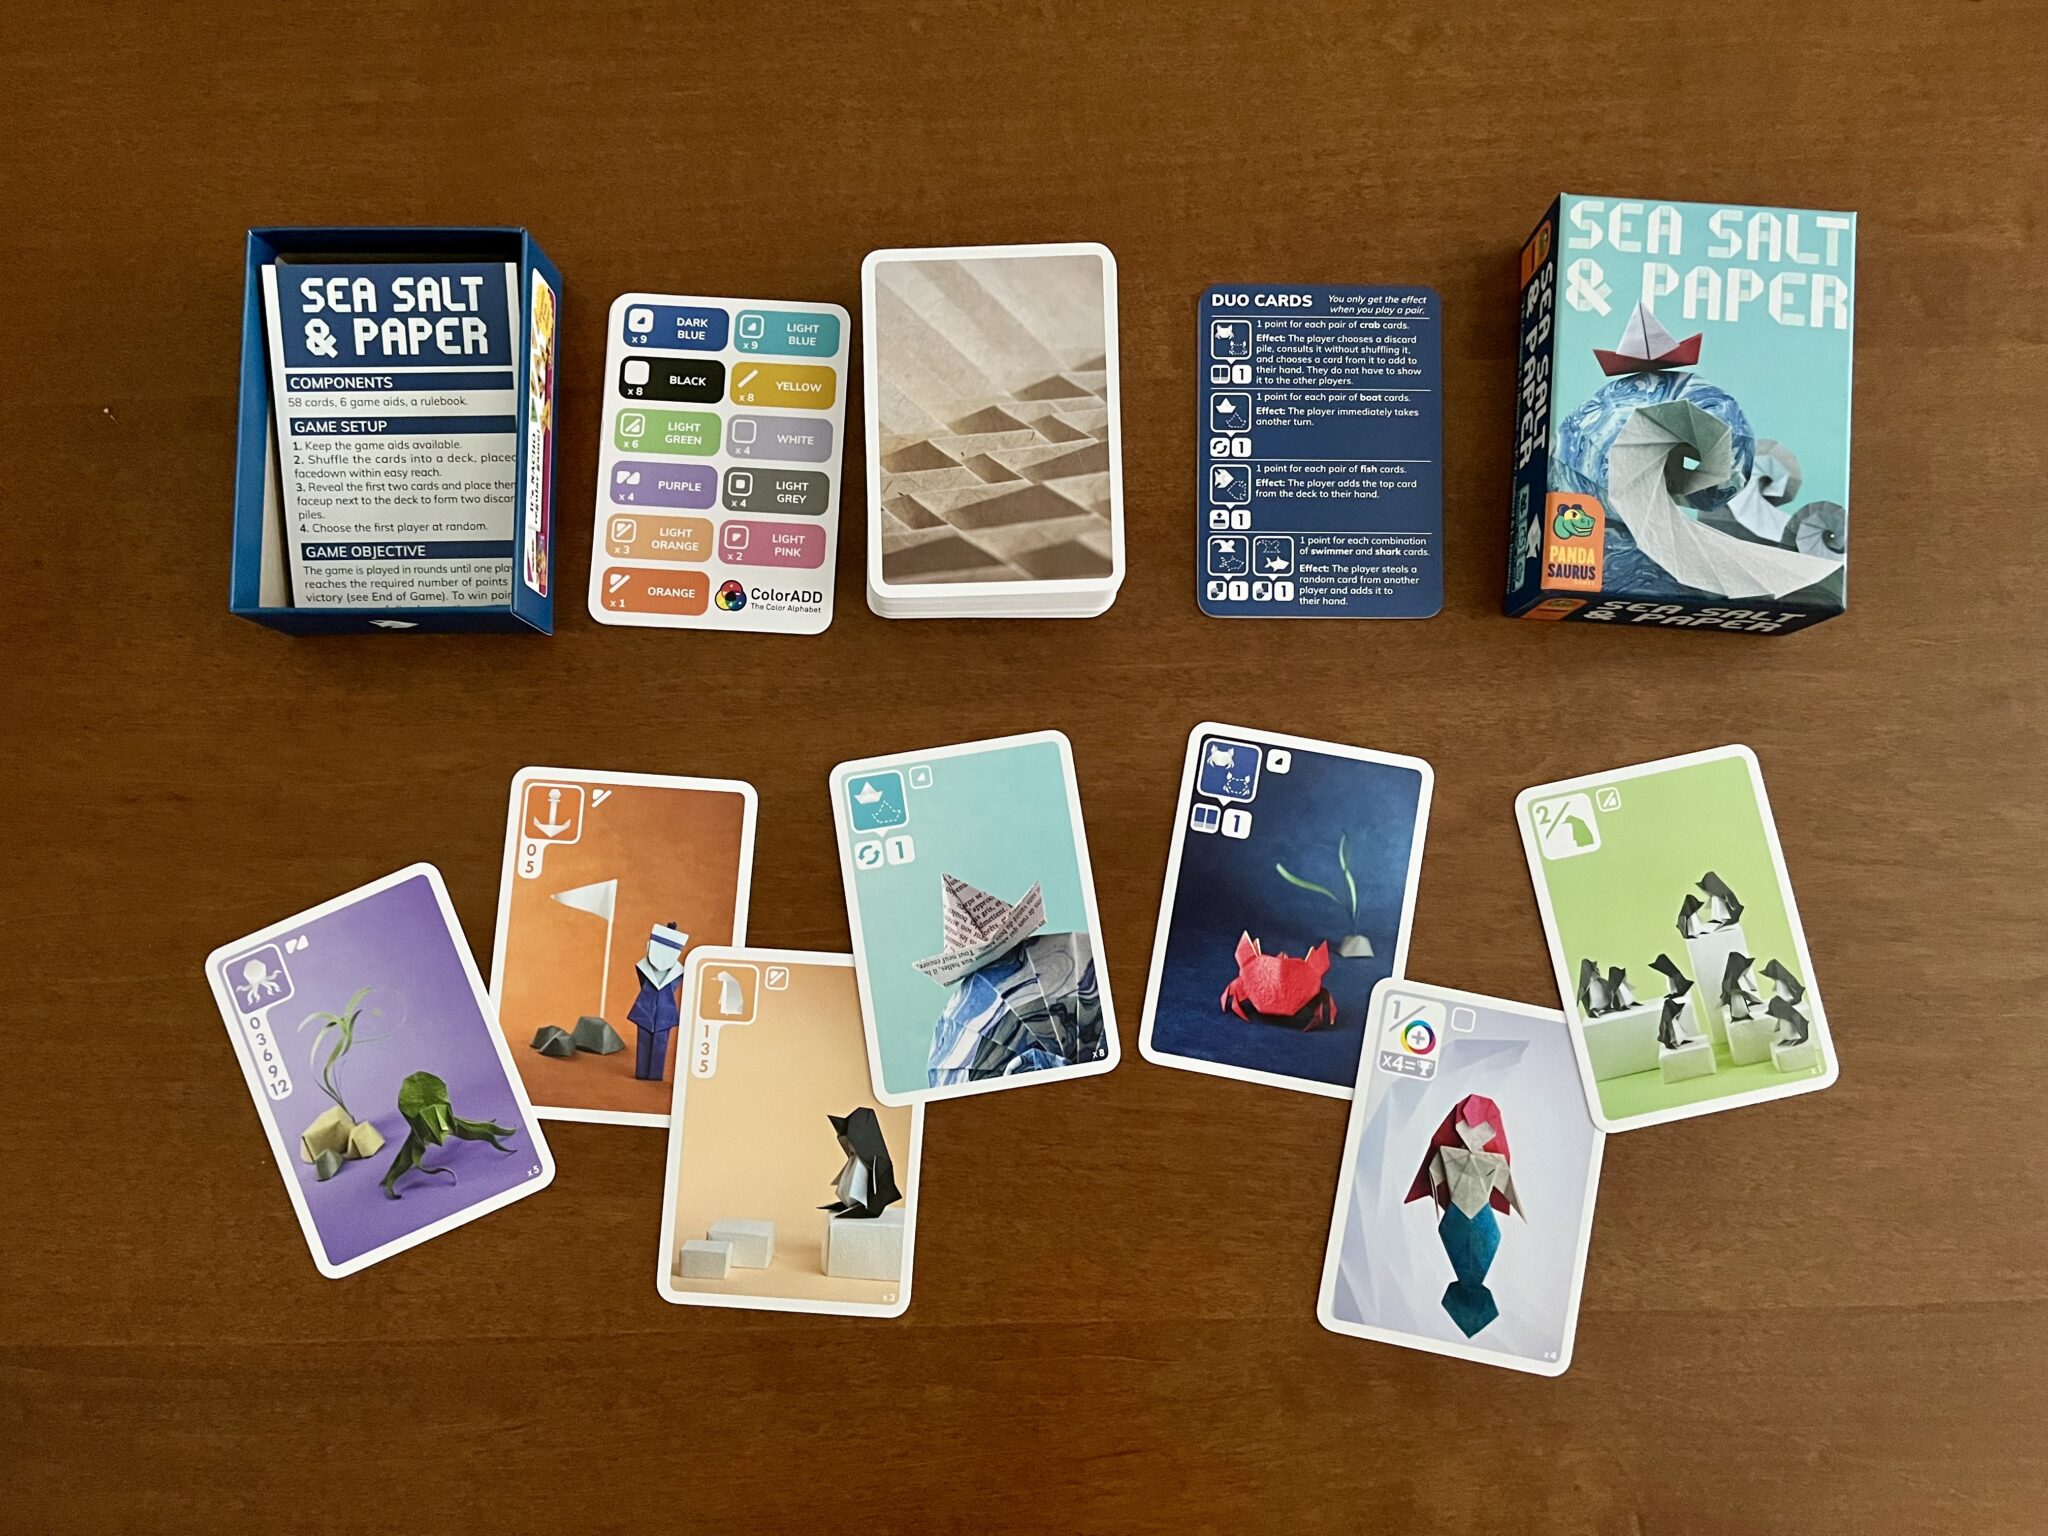 Sea Salt & Paper components and cards